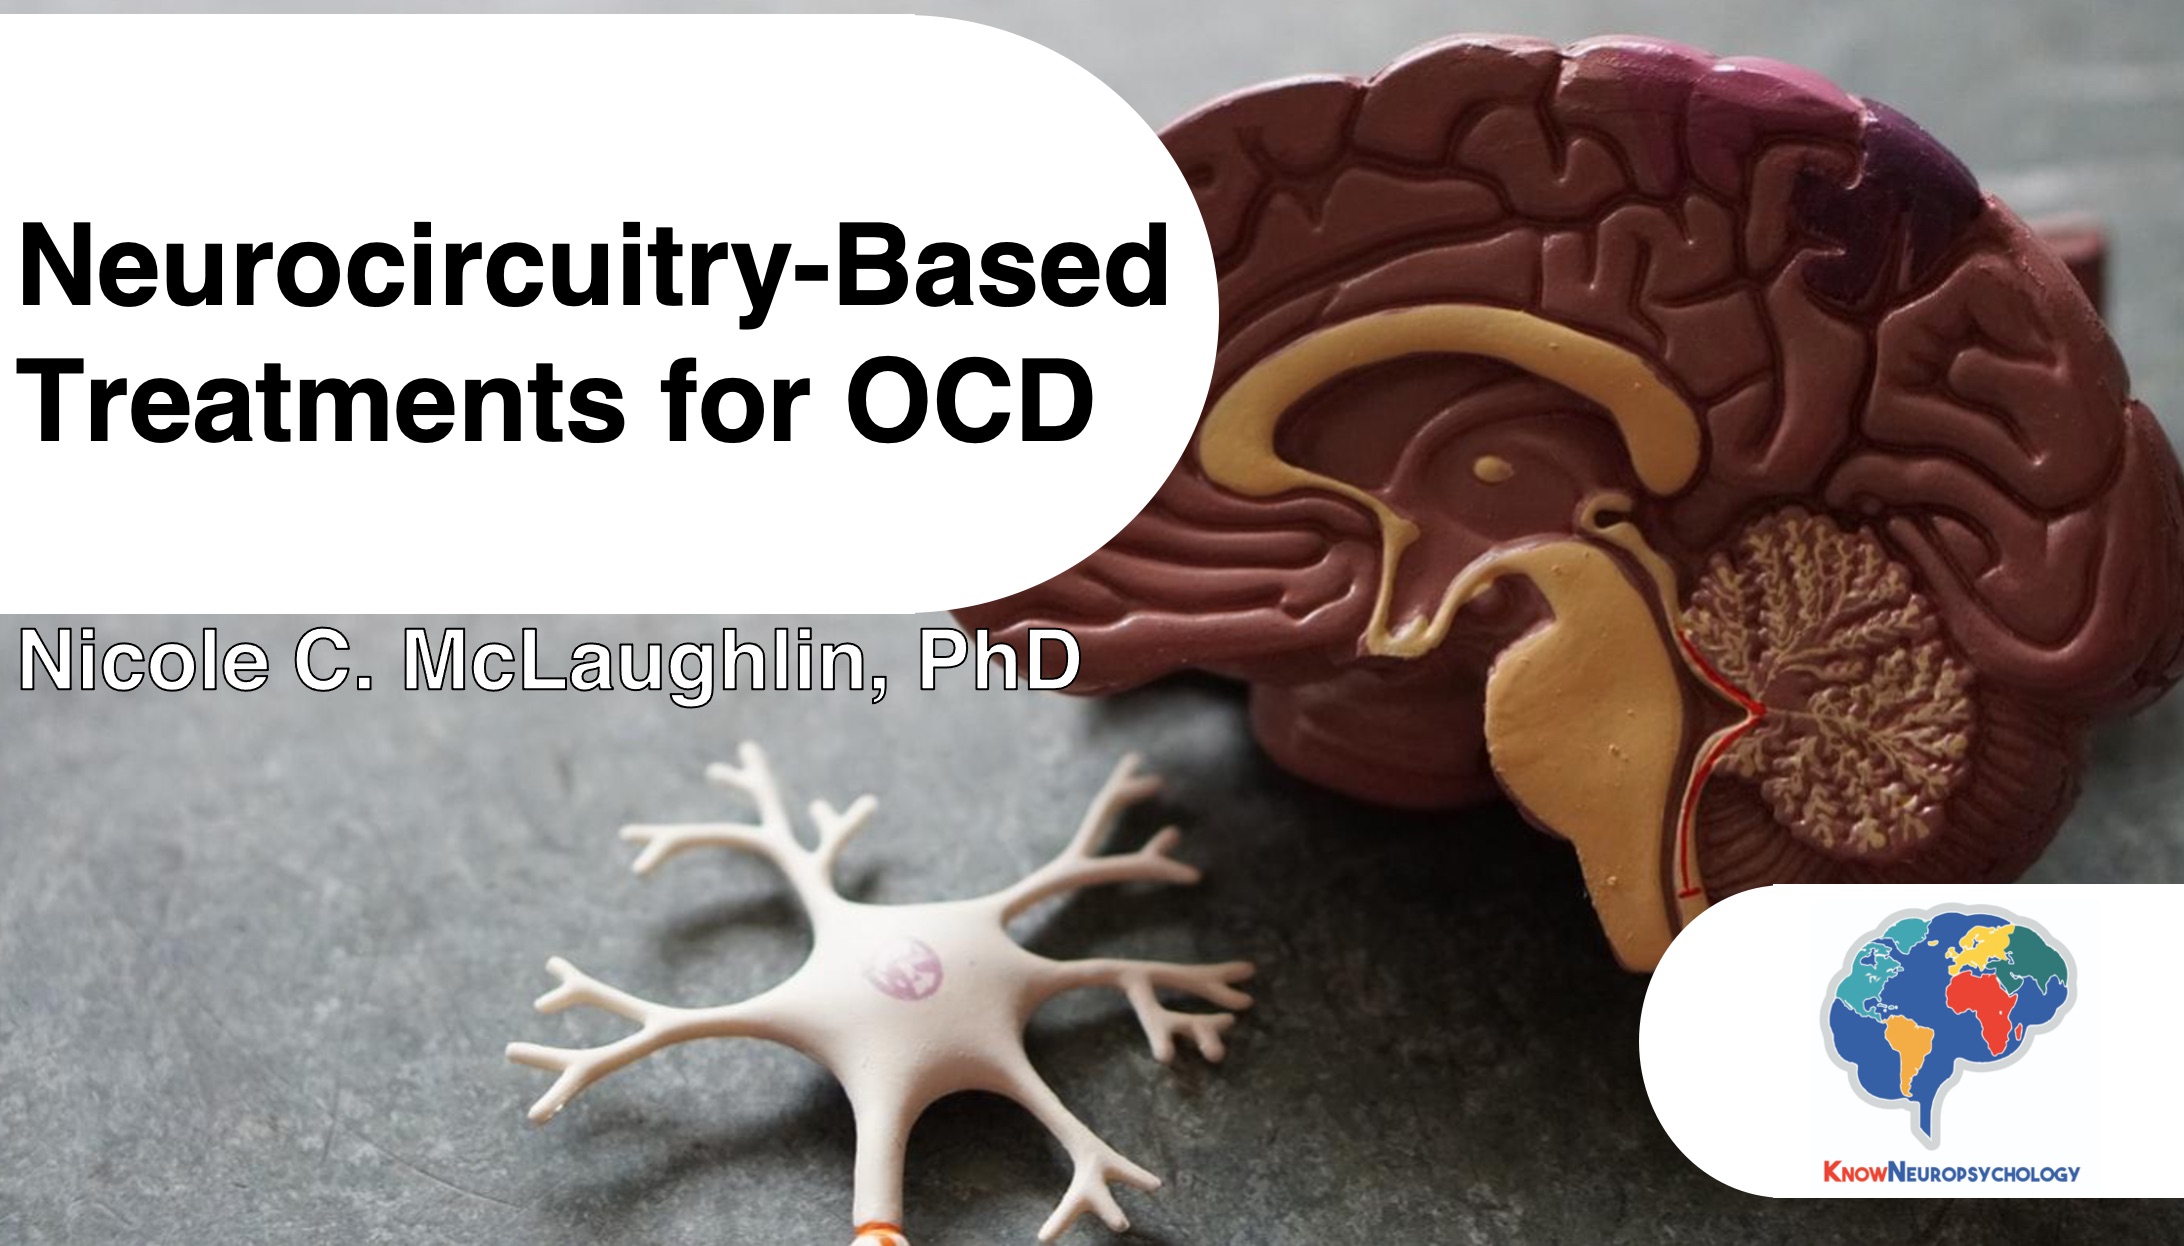 Neurocircuitry-Based Interventions for OCD by Dr. Nicole McLaughlin on November 14, 2022